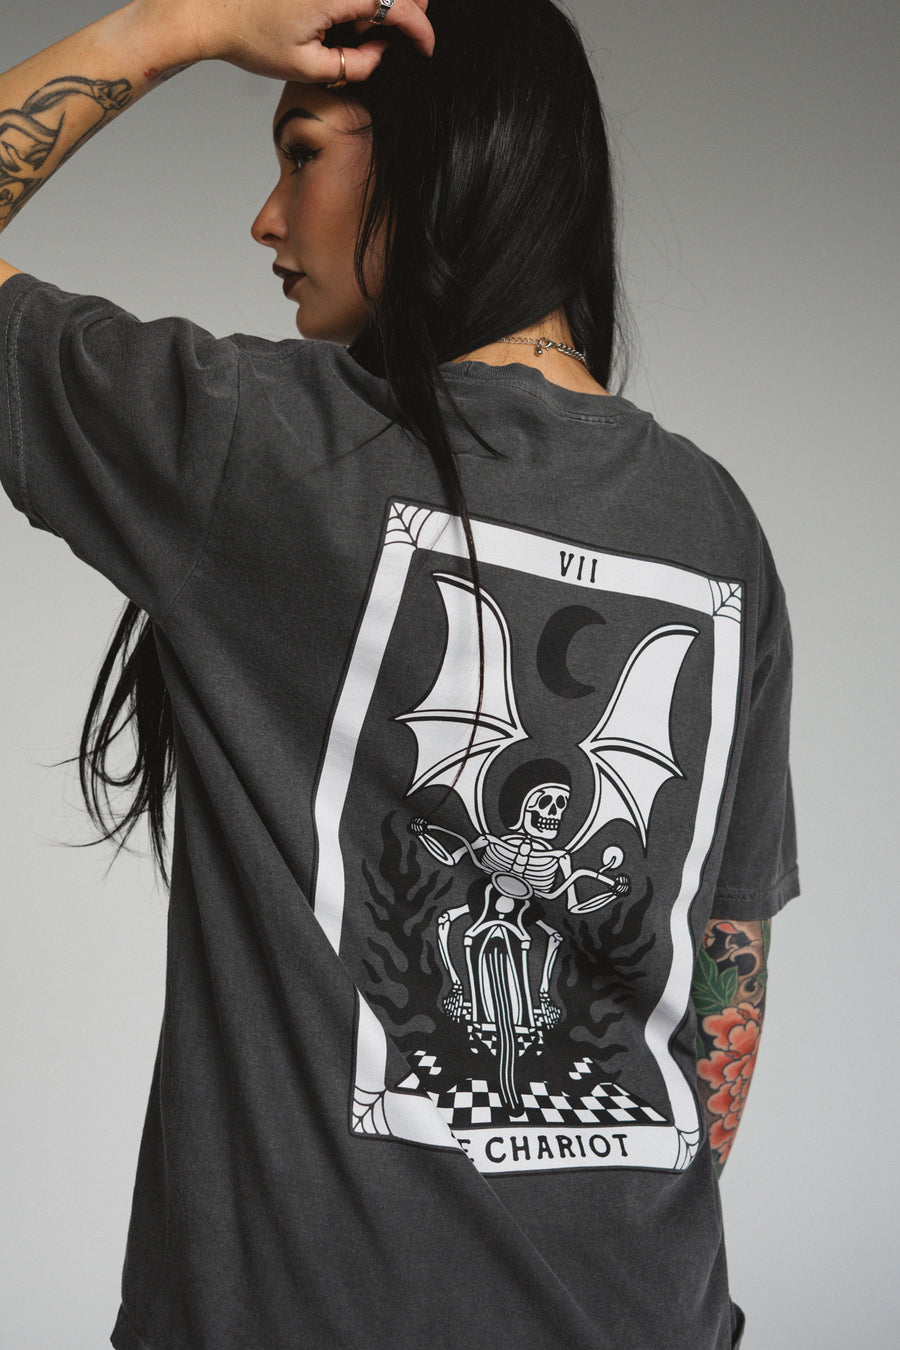 The Chariot (VII) Tee